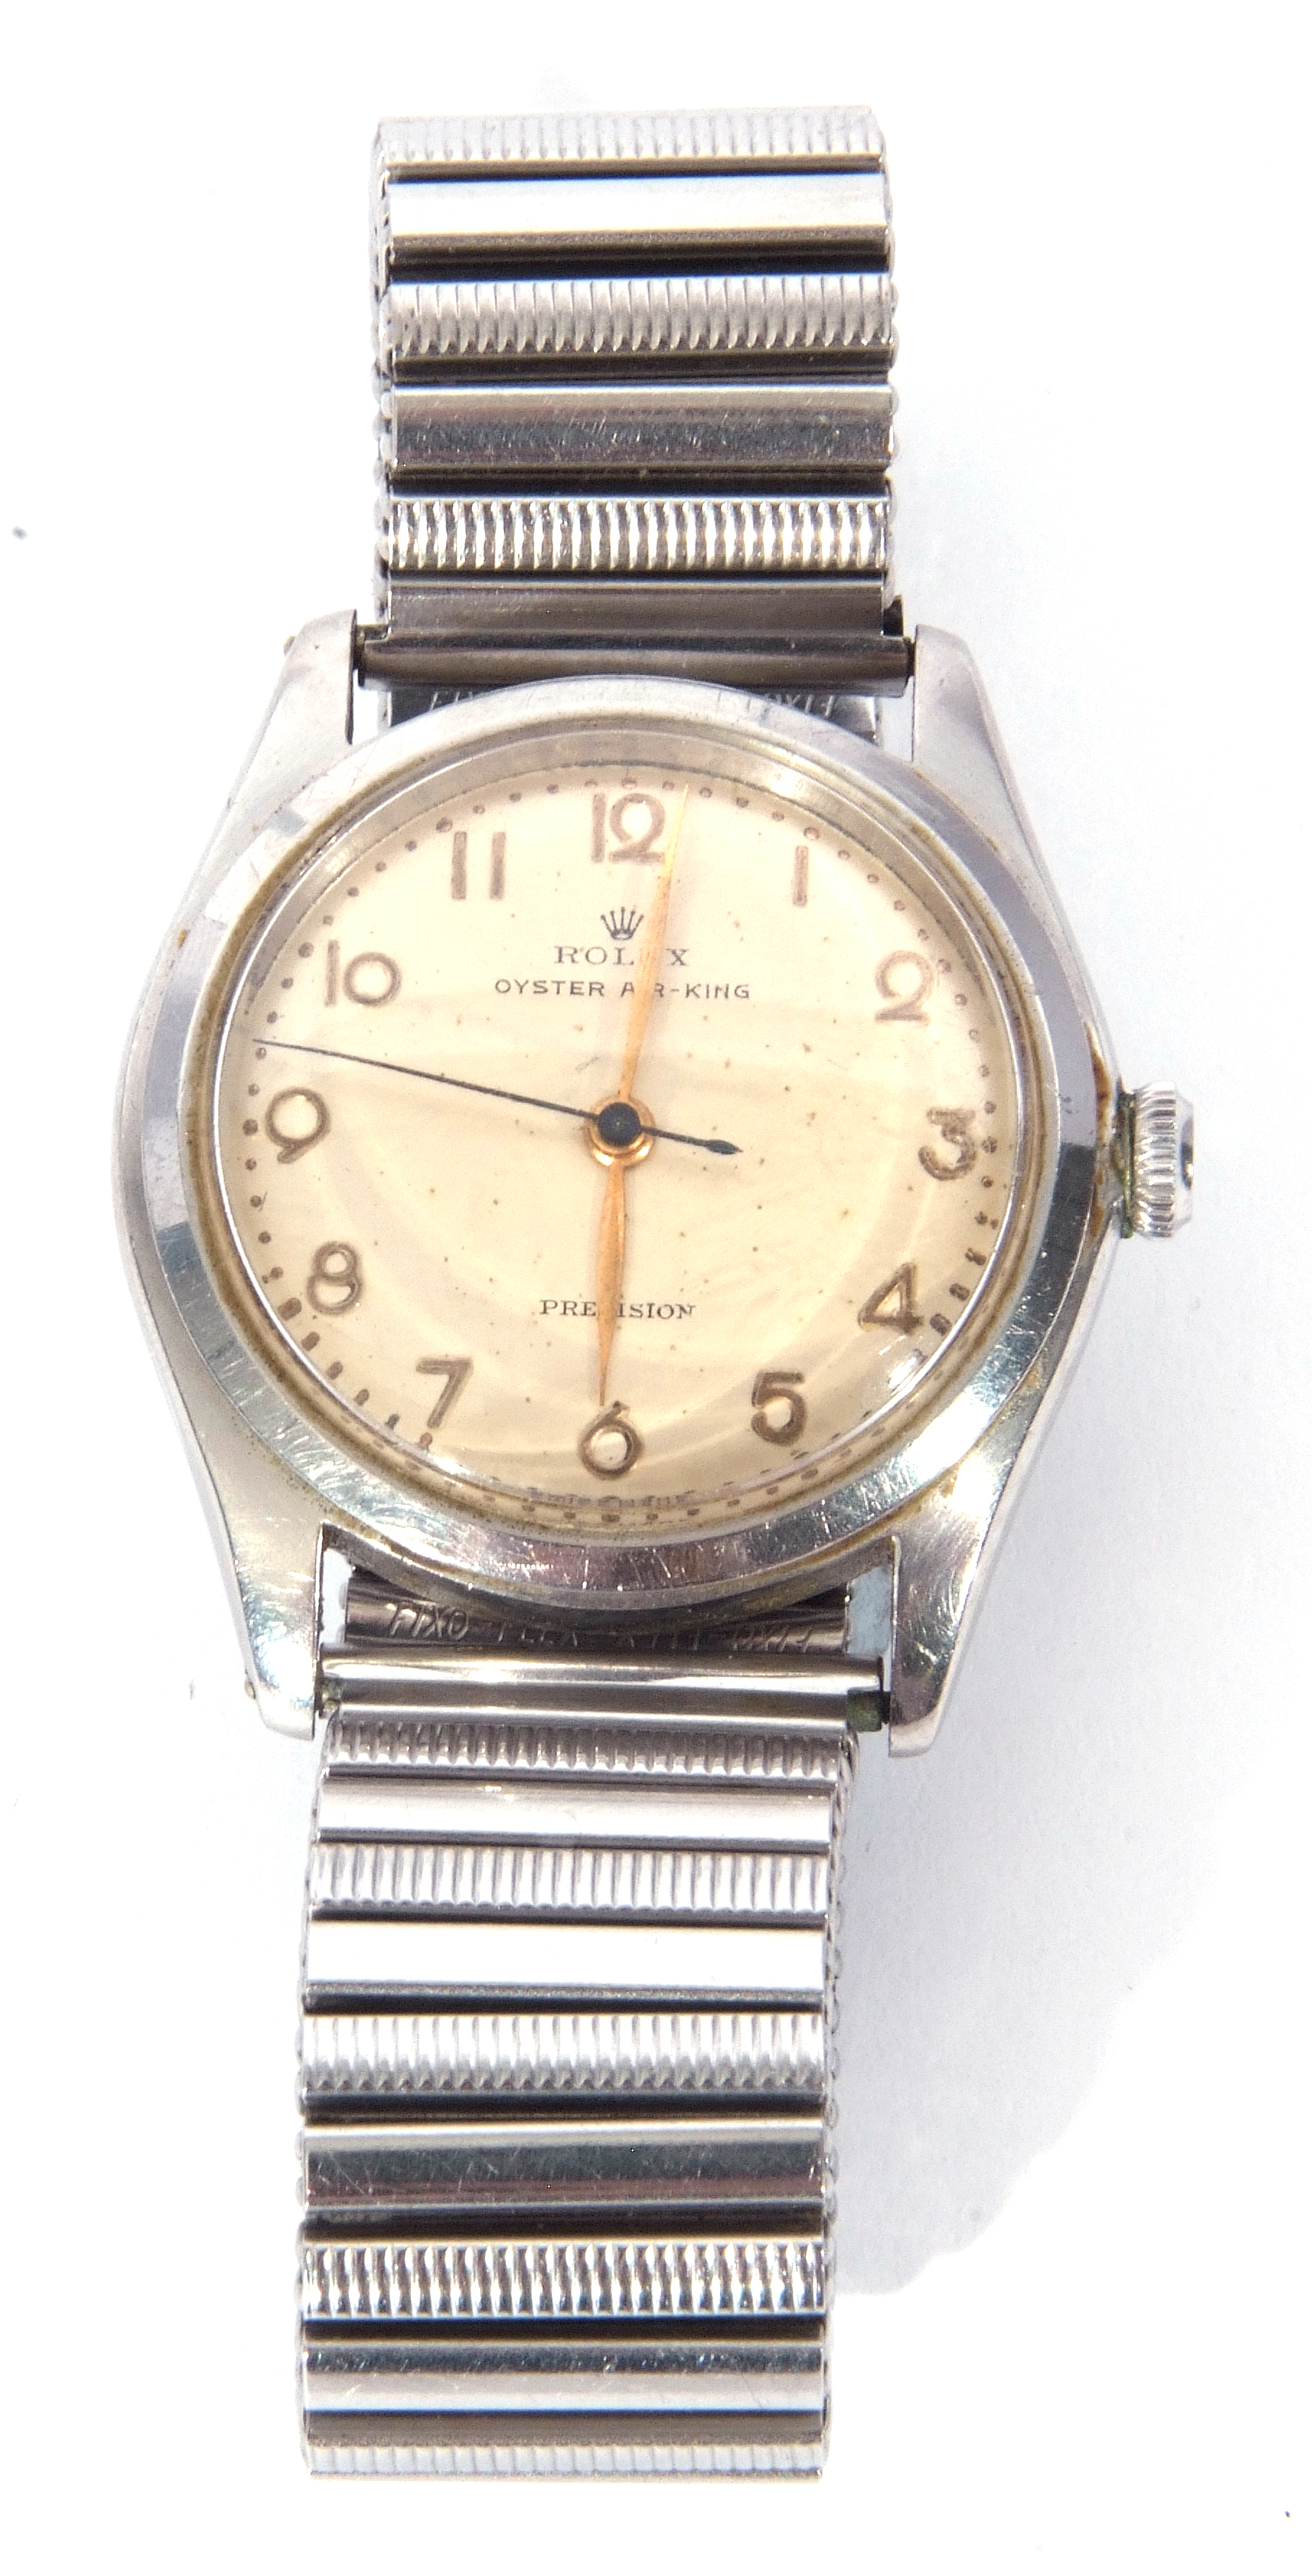 Third quarter of 20th century gents Rolex Oyster Air-King perpetual wrist watch with stainless steel - Image 7 of 7